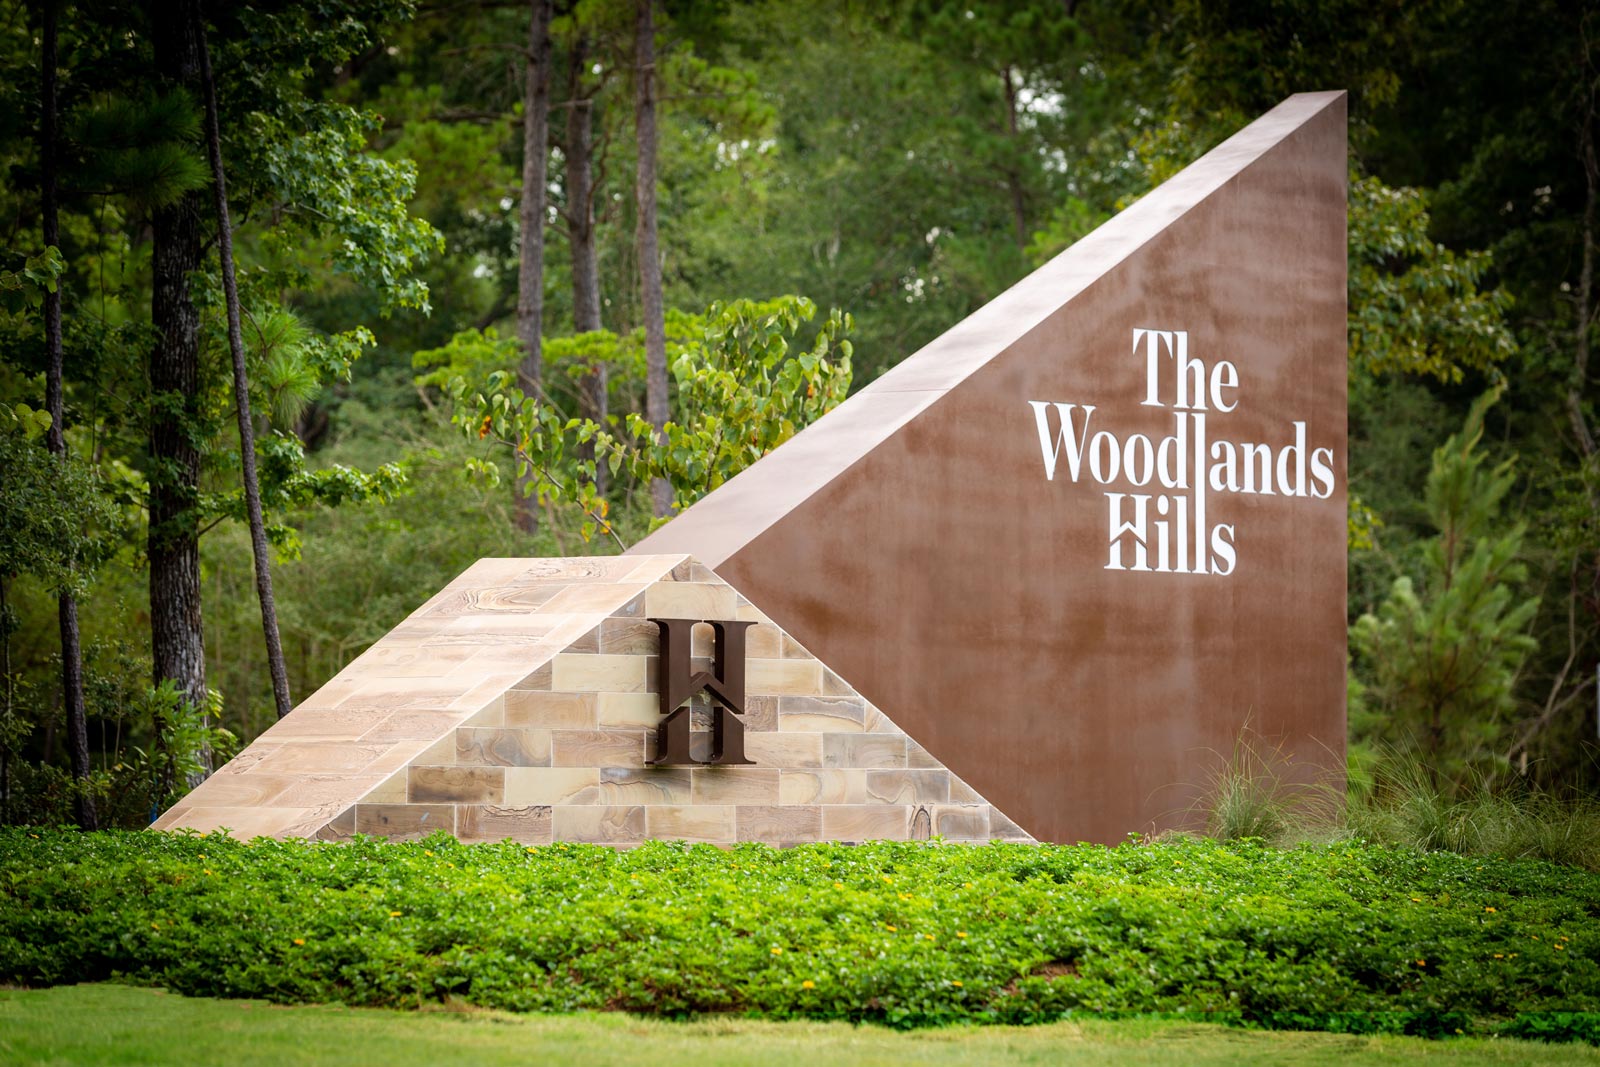 $10,000 Fall Promotion Available For New Homes Purchased In The Woodlands Hills®